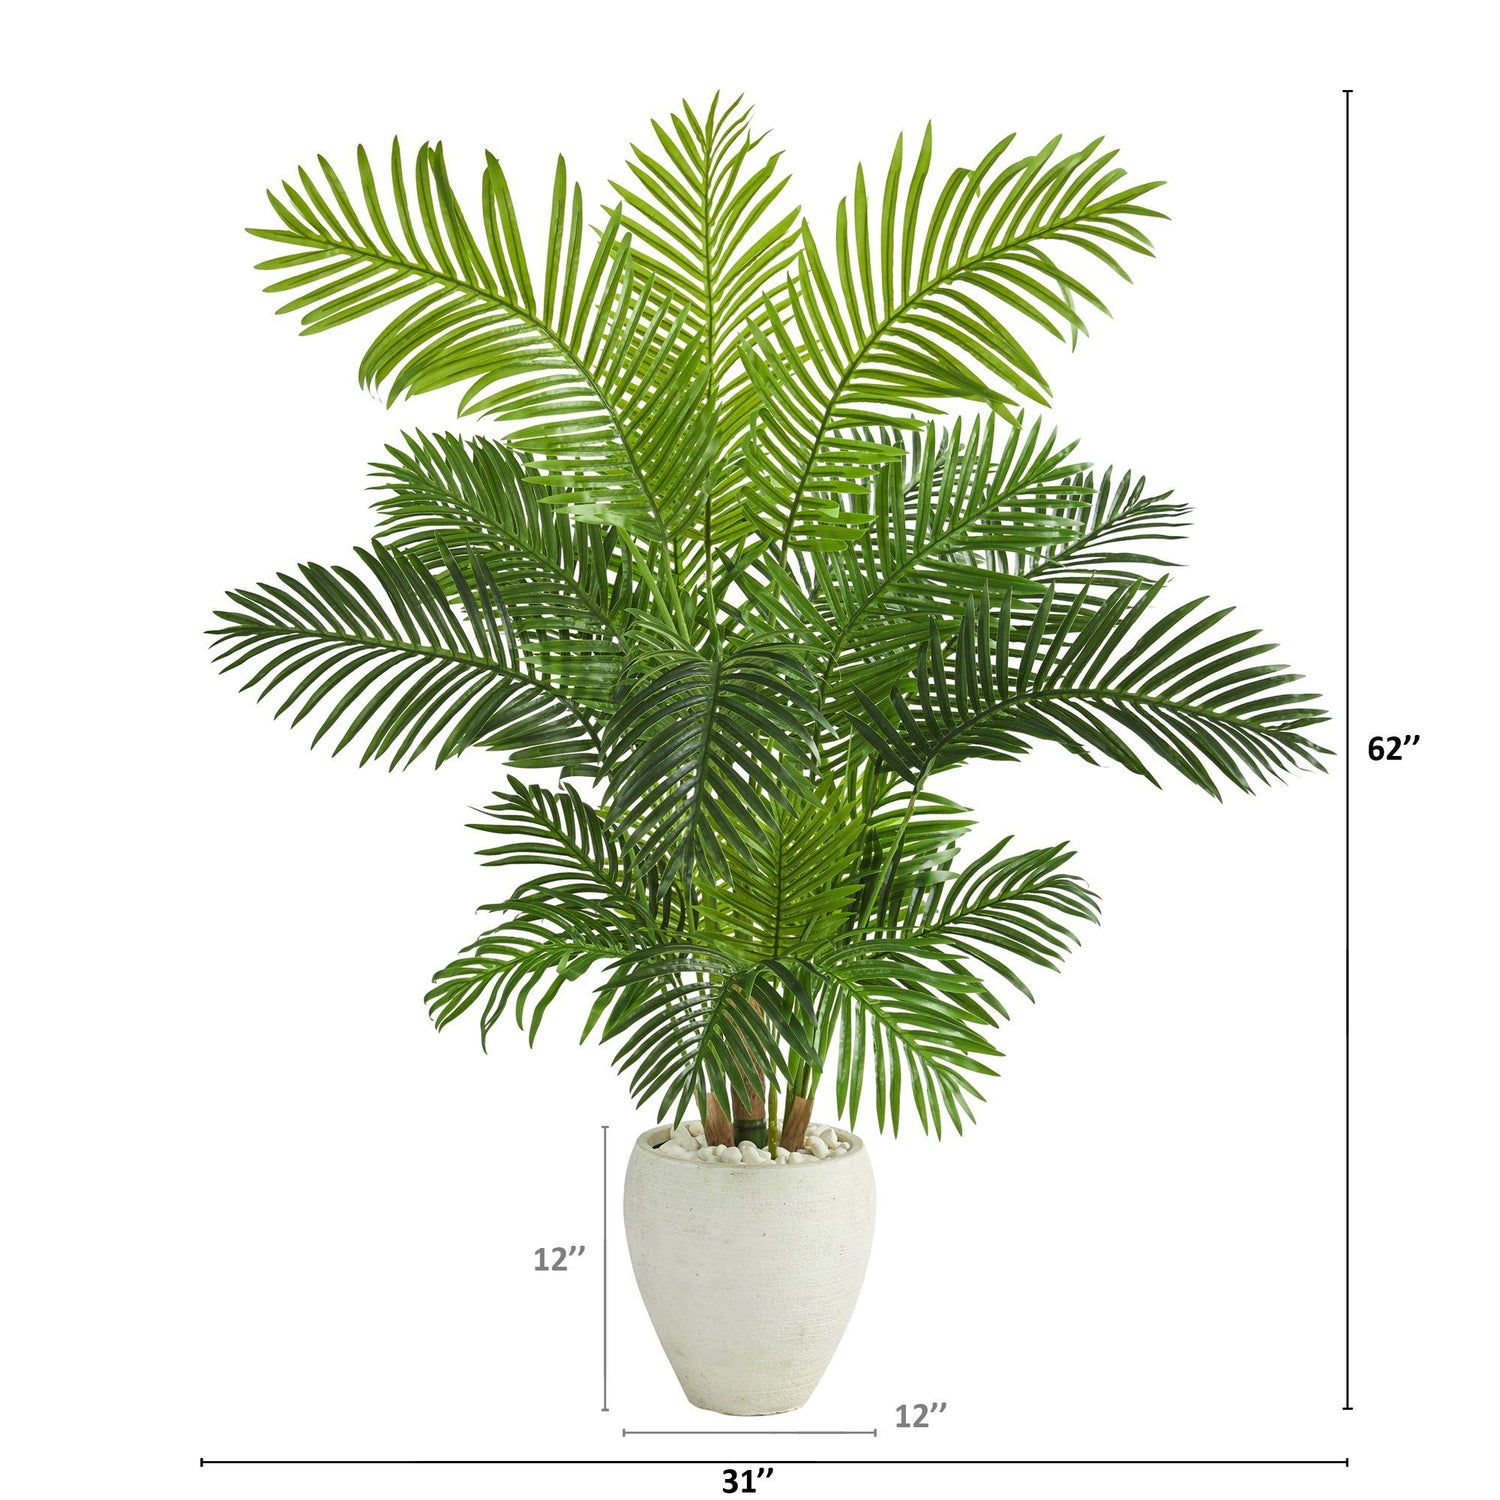 62” Hawaii Palm Artificial Tree in White Planter